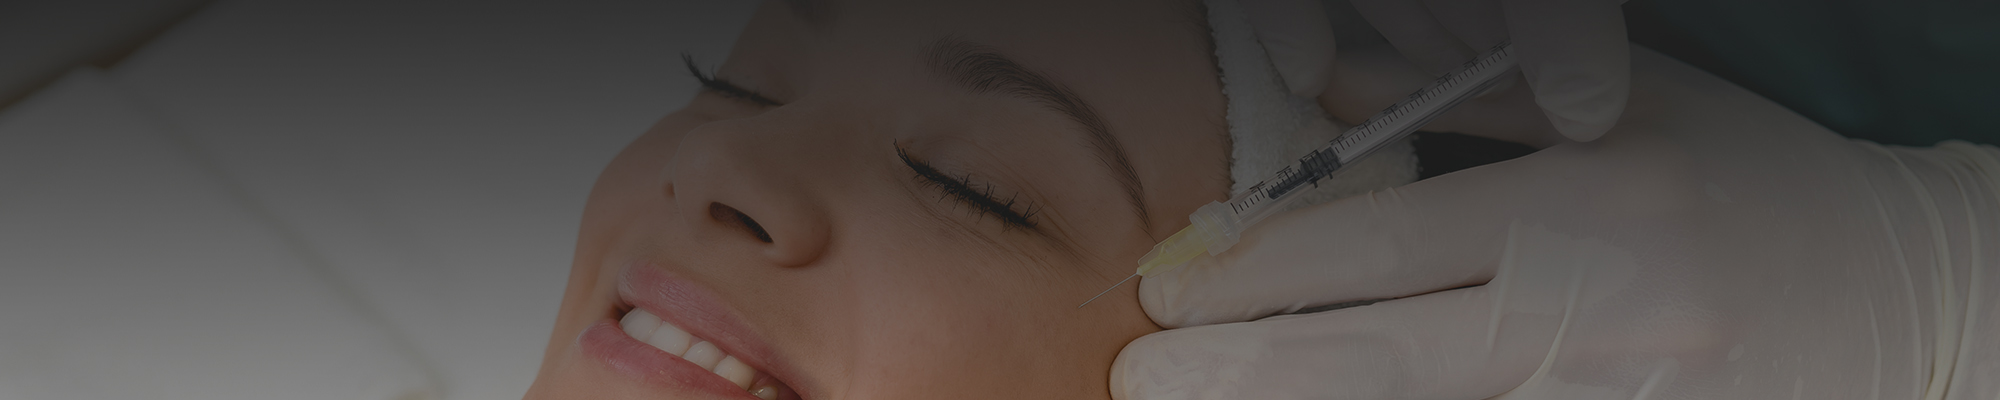 Doctor-run botox & facial fillers and injectables treatments near Milwaukee